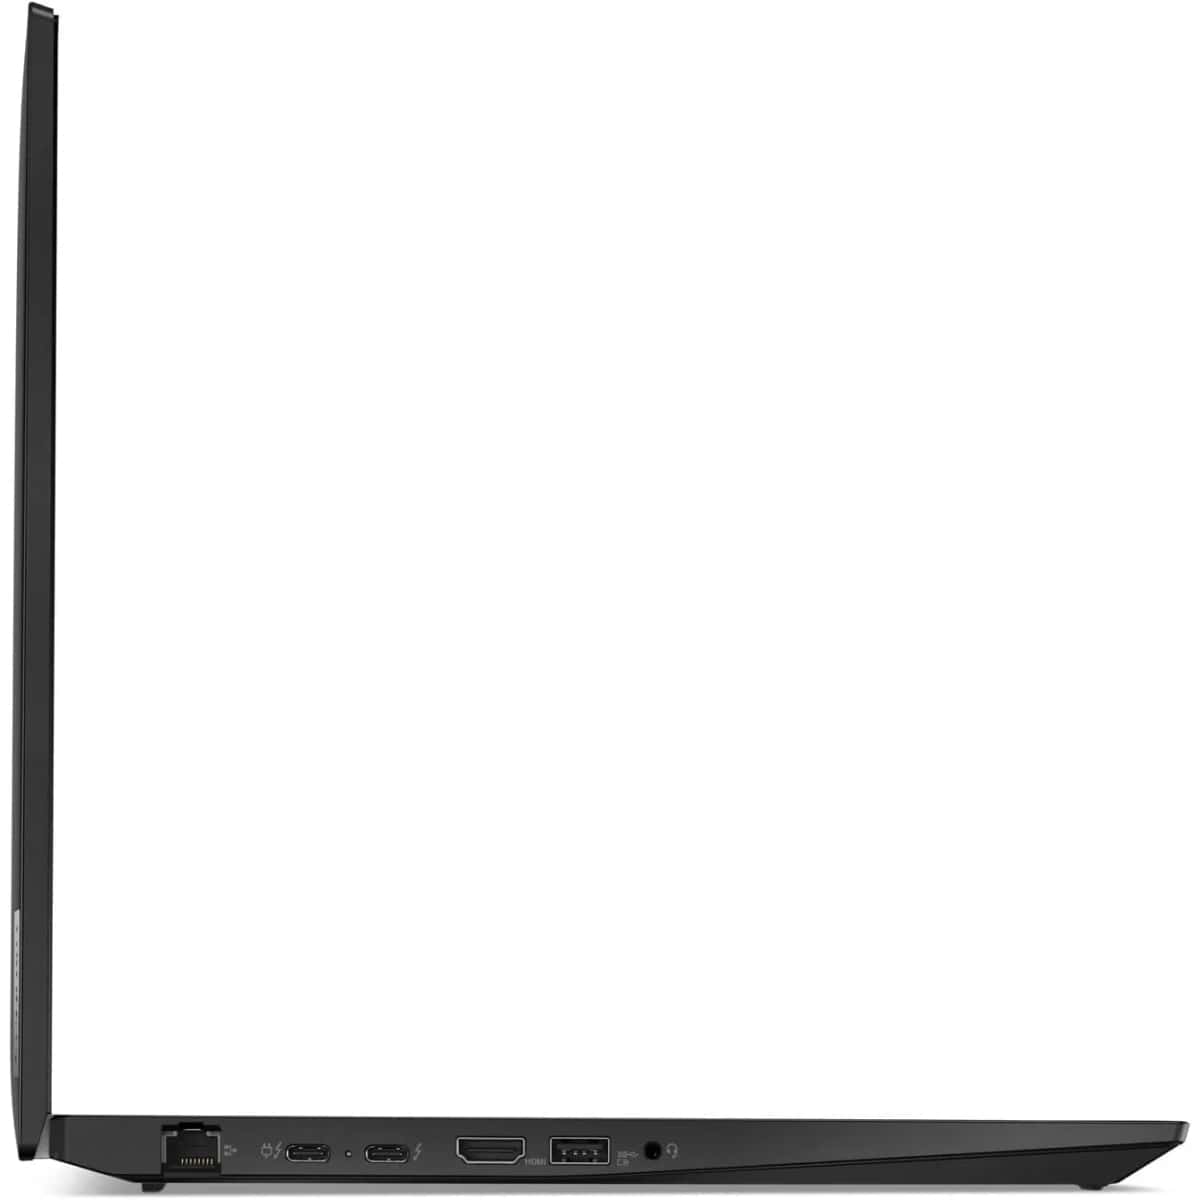 Lenovo NEW ThinkPad T16 Gen 1 Intel Core i7 up to 4.7GHz 18M Cash 12-Cores